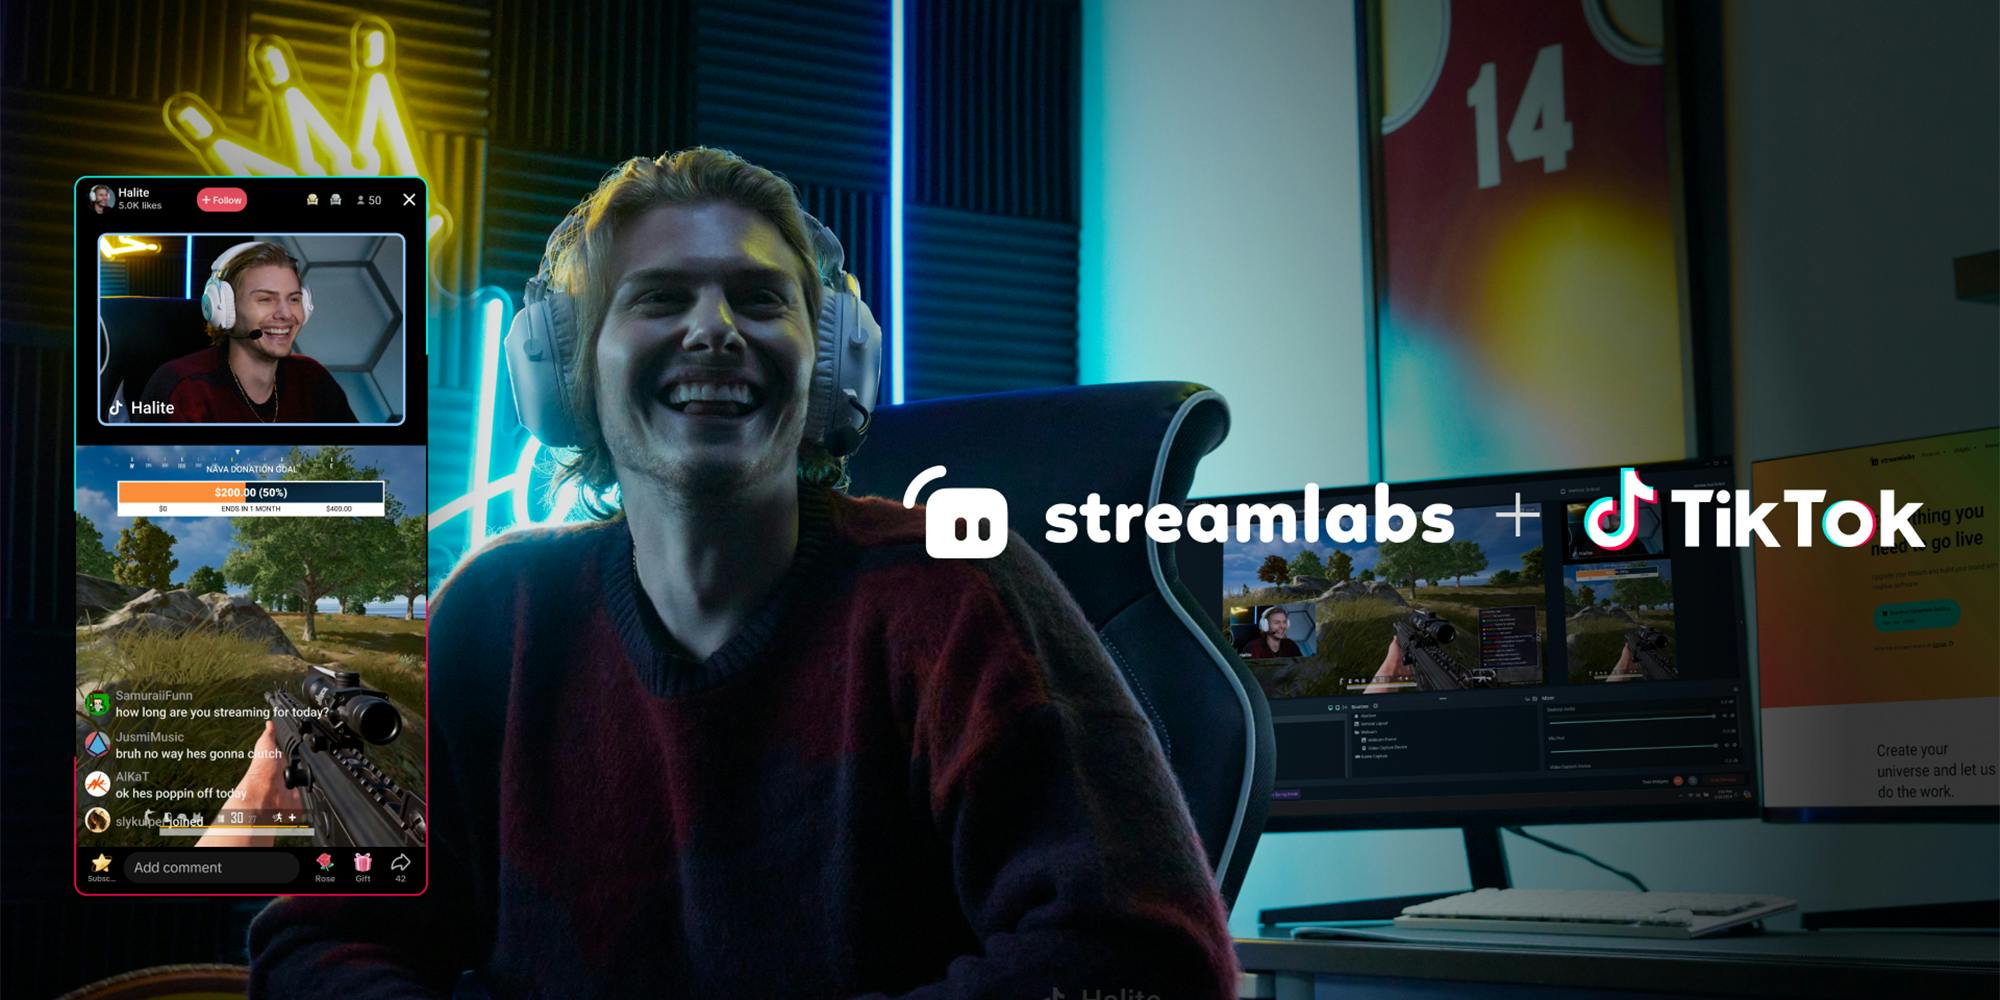 streamlabs logo next to tiktok logo with a person doing a live stream playing videos